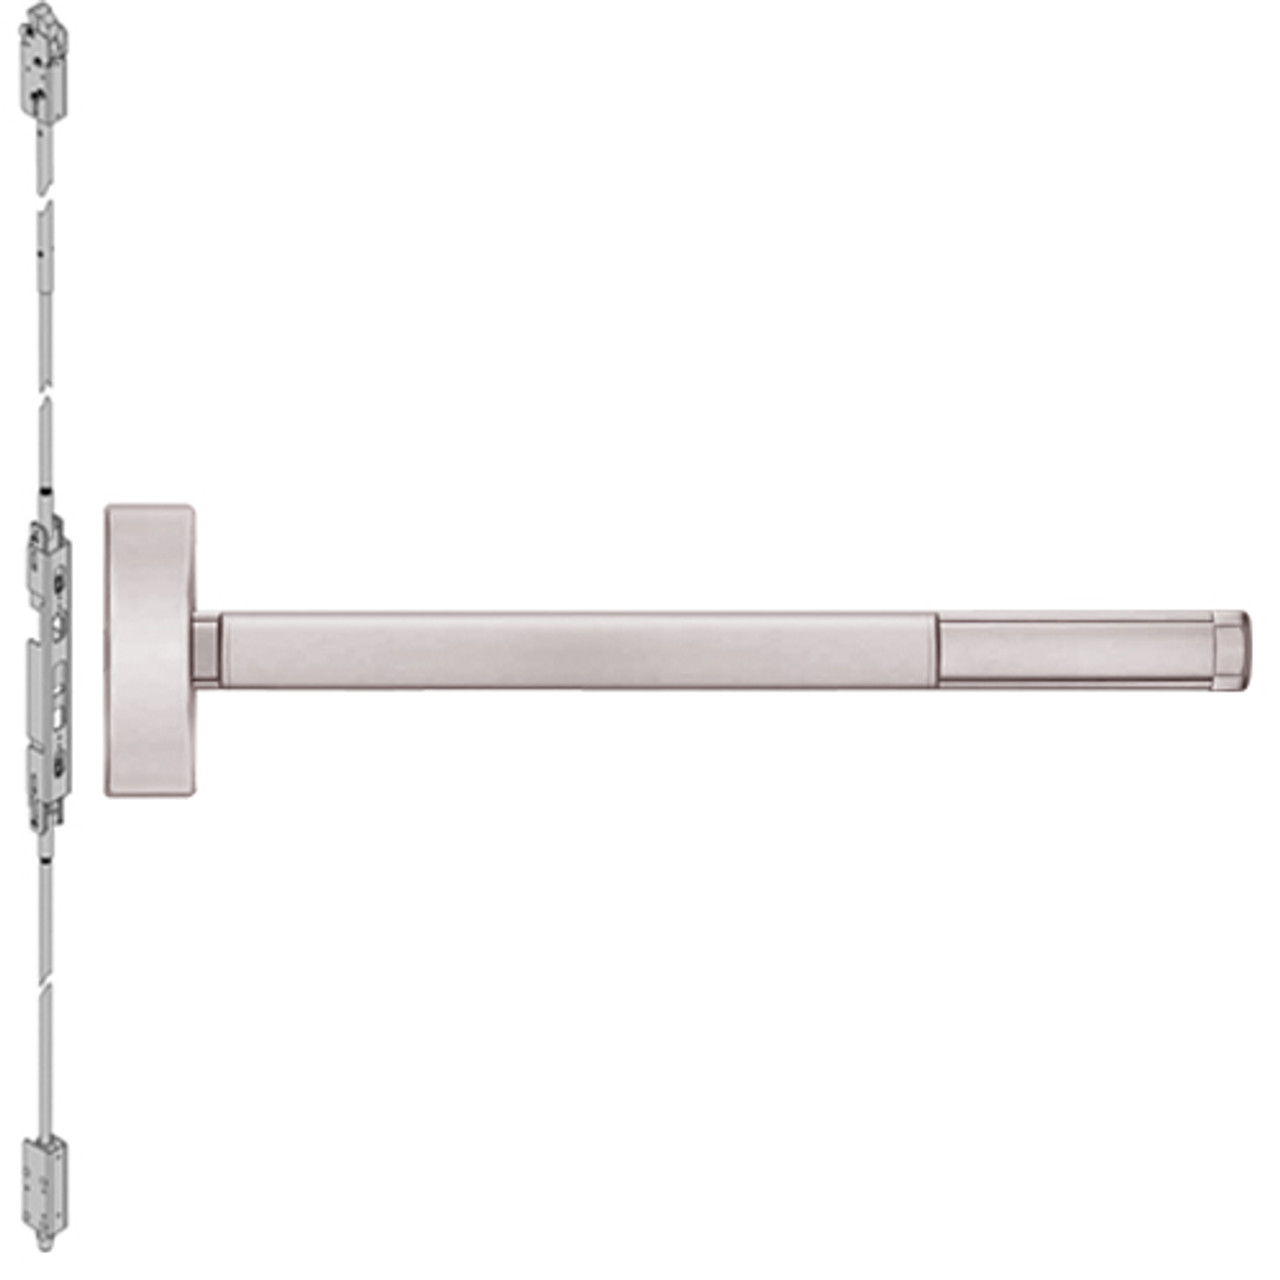 DE2801LBR-628-48 PHI 2800 Series Concealed Vertical Rod Exit Device with Delayed Egress Prepped for Cover Plate in Satin Aluminum Finish